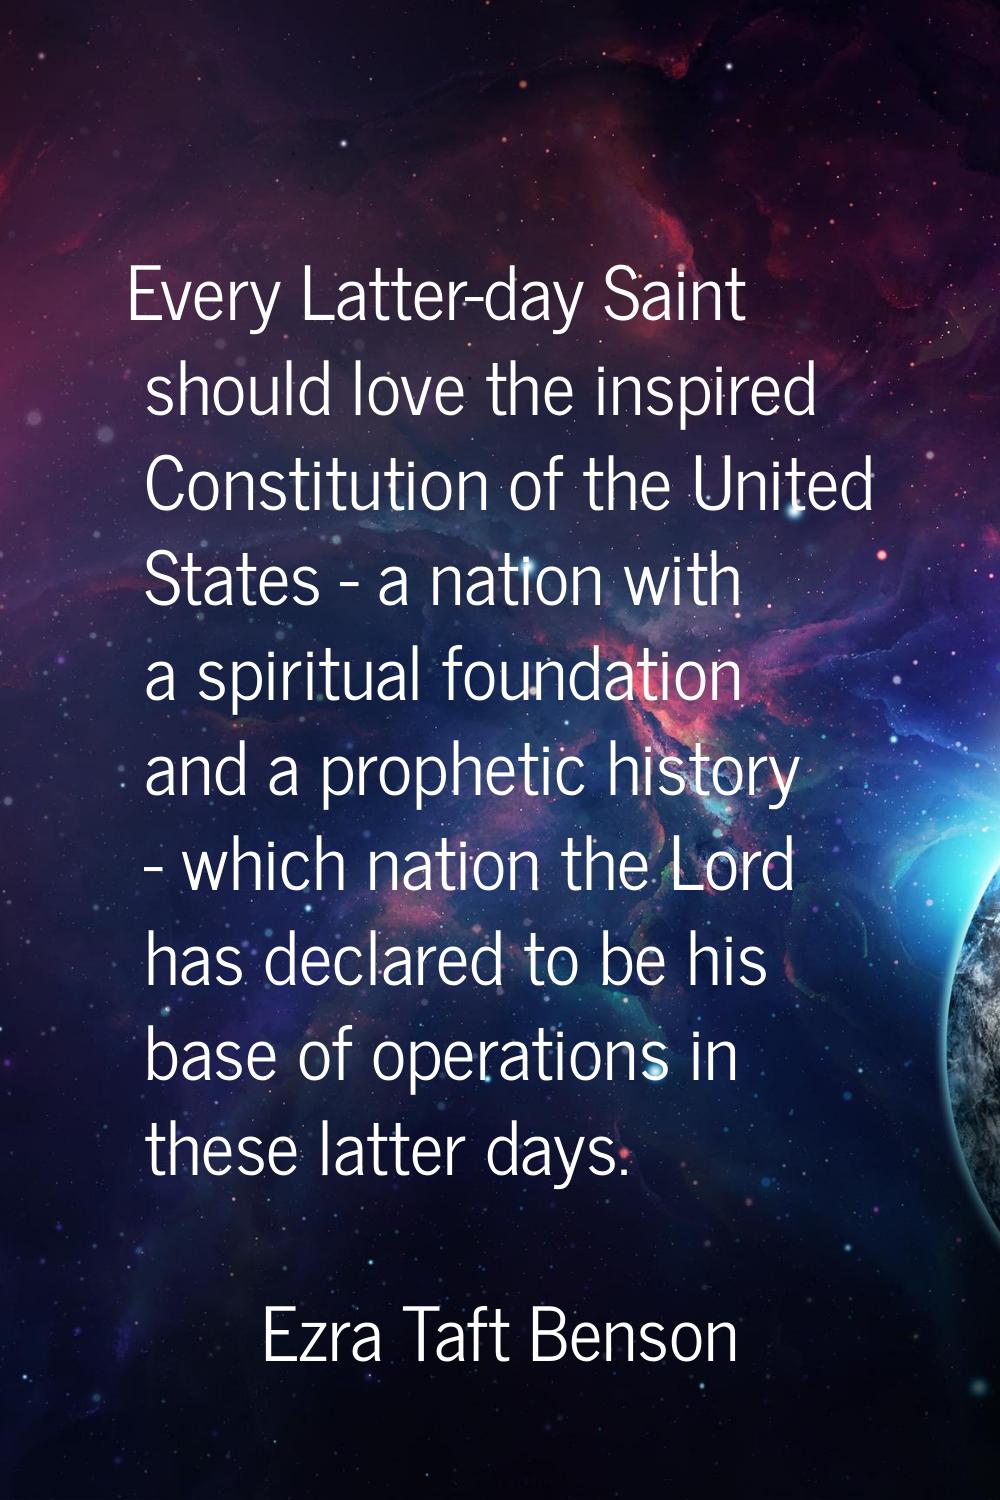 Every Latter-day Saint should love the inspired Constitution of the United States - a nation with a